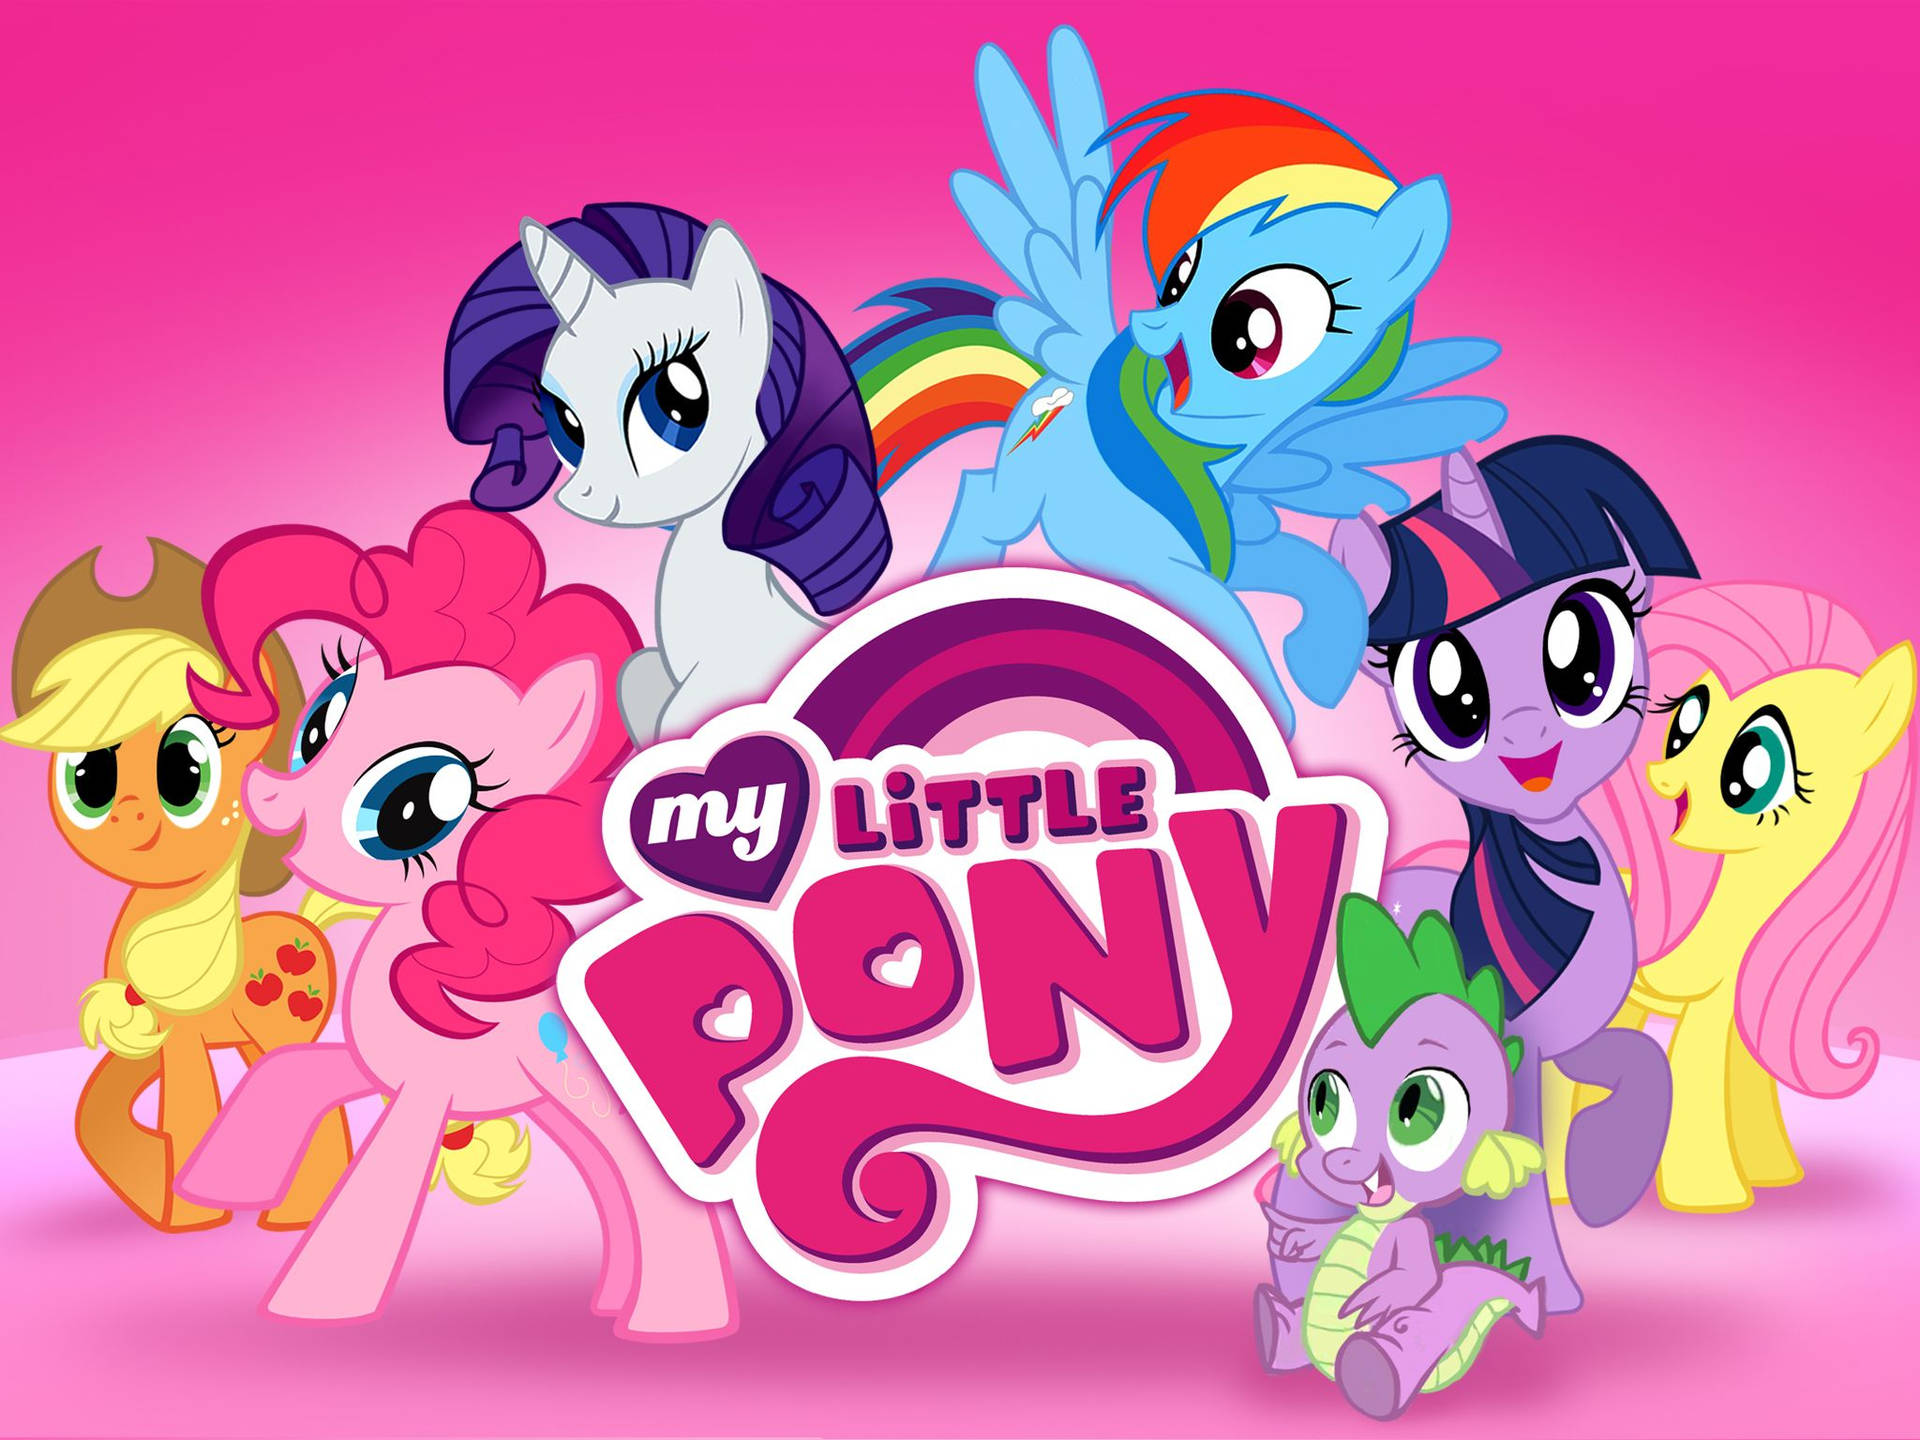 Enjoy The Magic Of Childhood With This Heartwarming My Little Pony Desktop Wallpaper Background